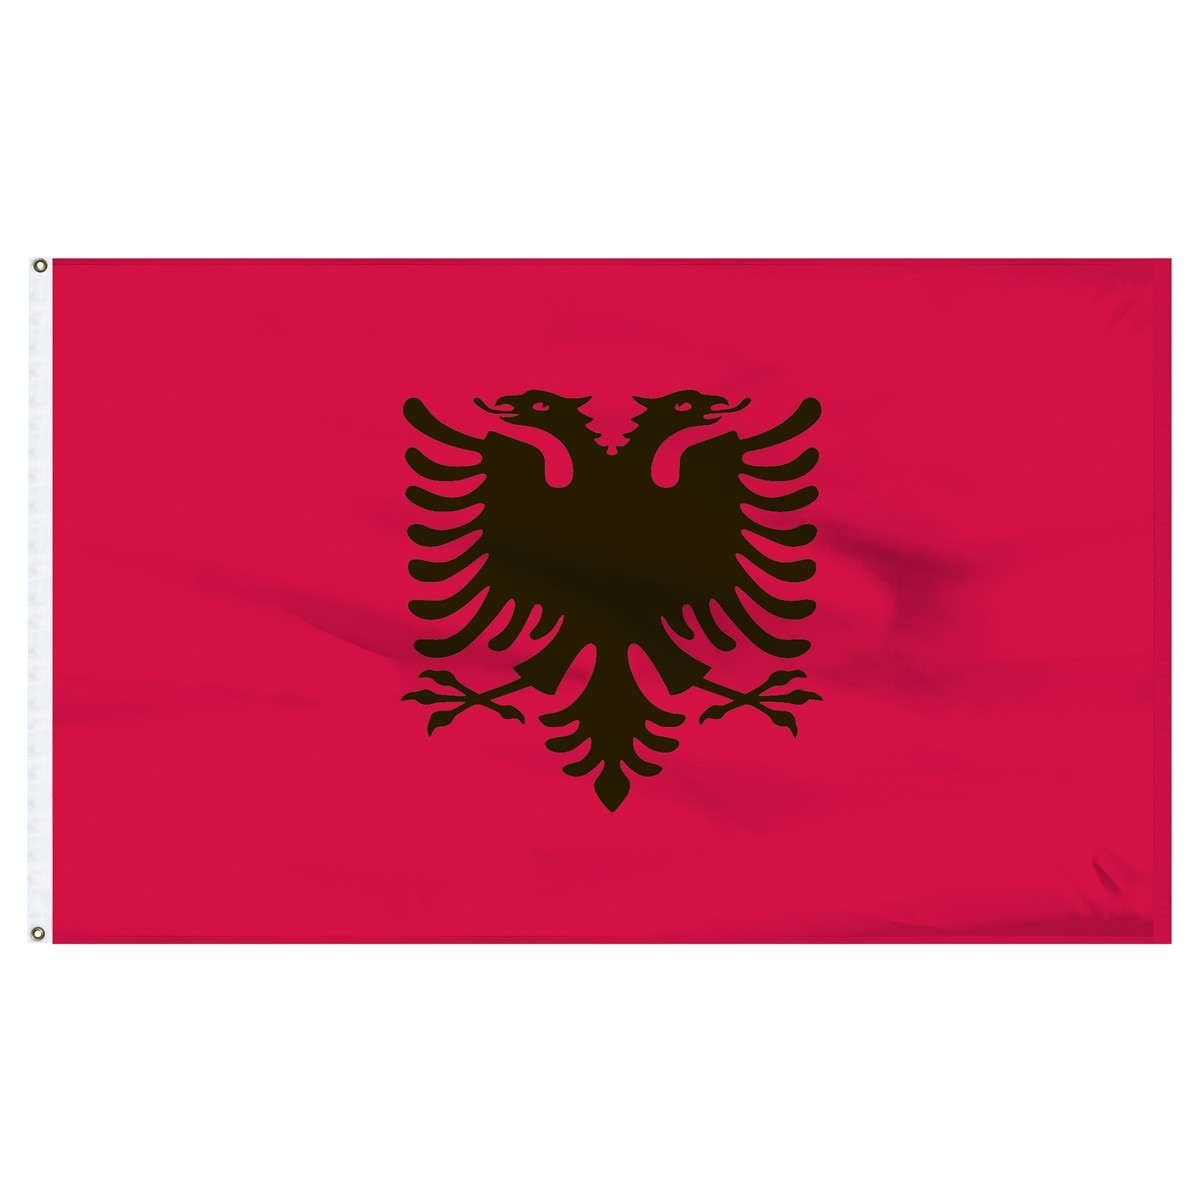 Shop Albania high quality world flags for sale online for schools, churches and businesses with 1-800 Flags